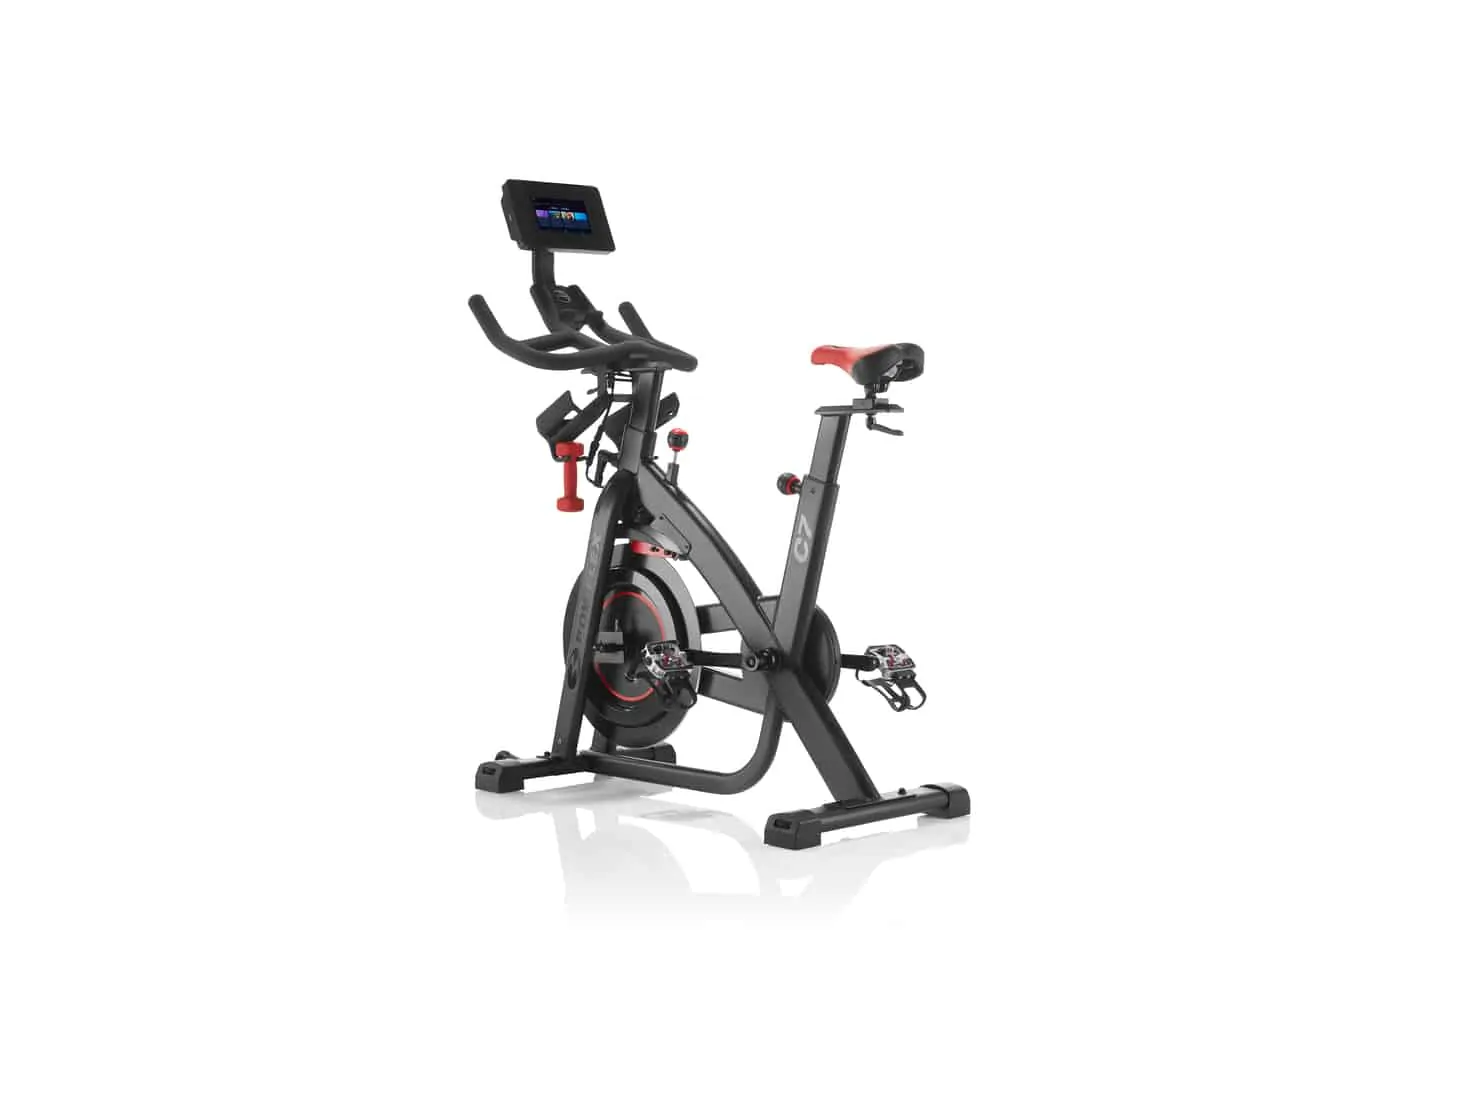 Home Fitness News: New Bowflex C7 connected indoor cycling bike makes retail debut at select Dick’s Sporting Goods.